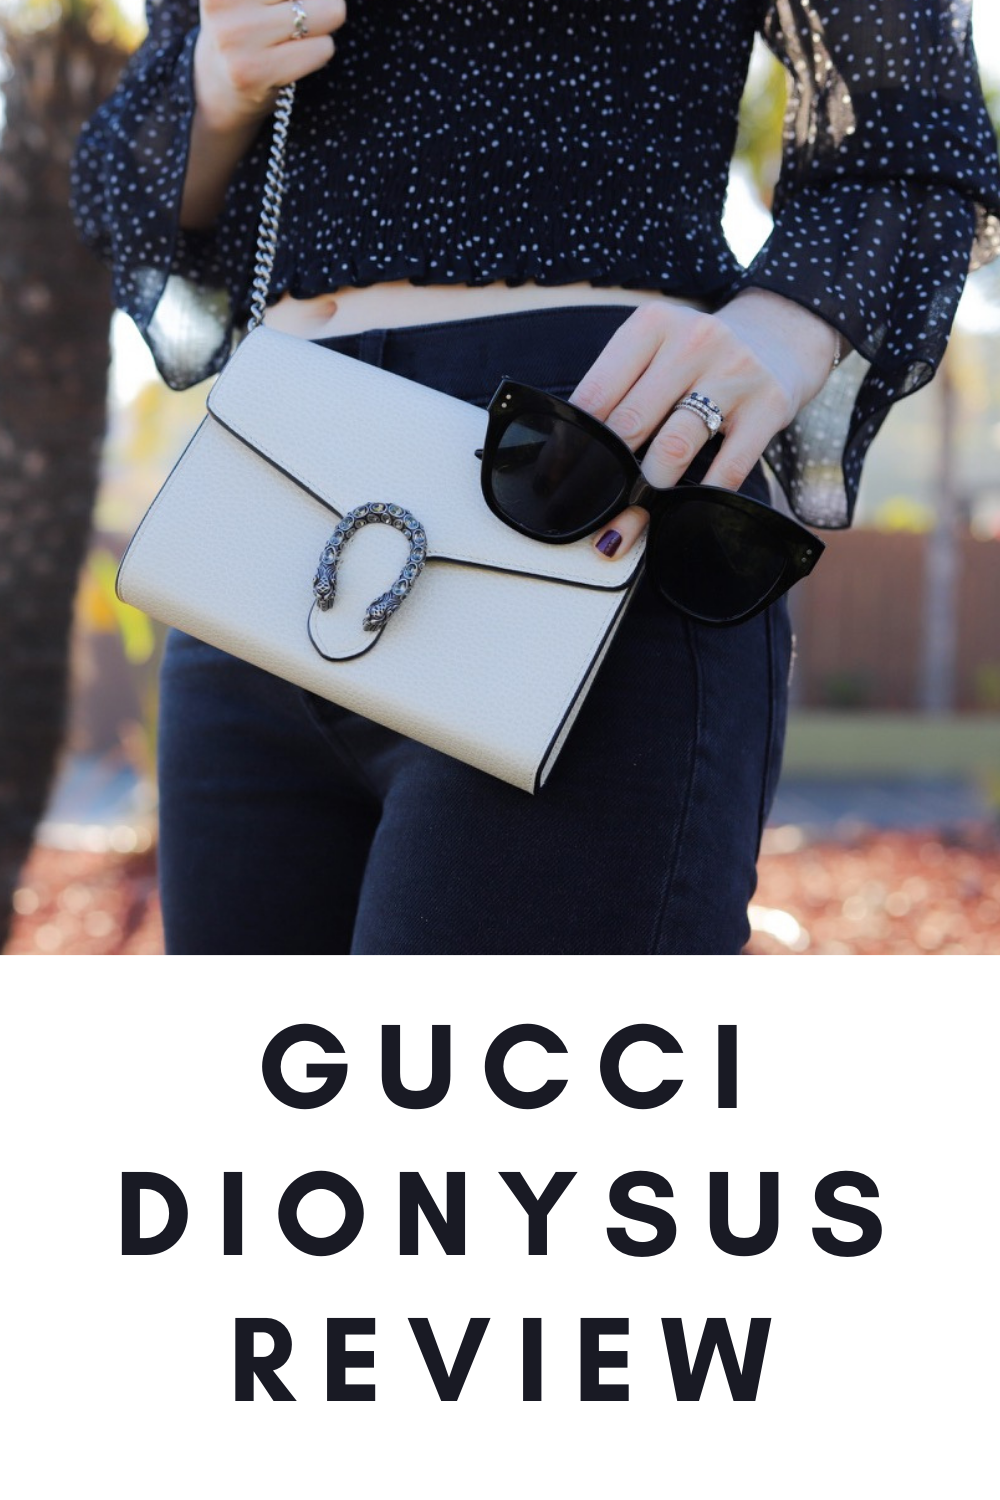 lments of style, la blogger, gucci dionysus review, mini leather chain bag comparison, handbag, designer crossbody, white leather, is it worth the money, what is the quality, what fits in the super mini  leather bag